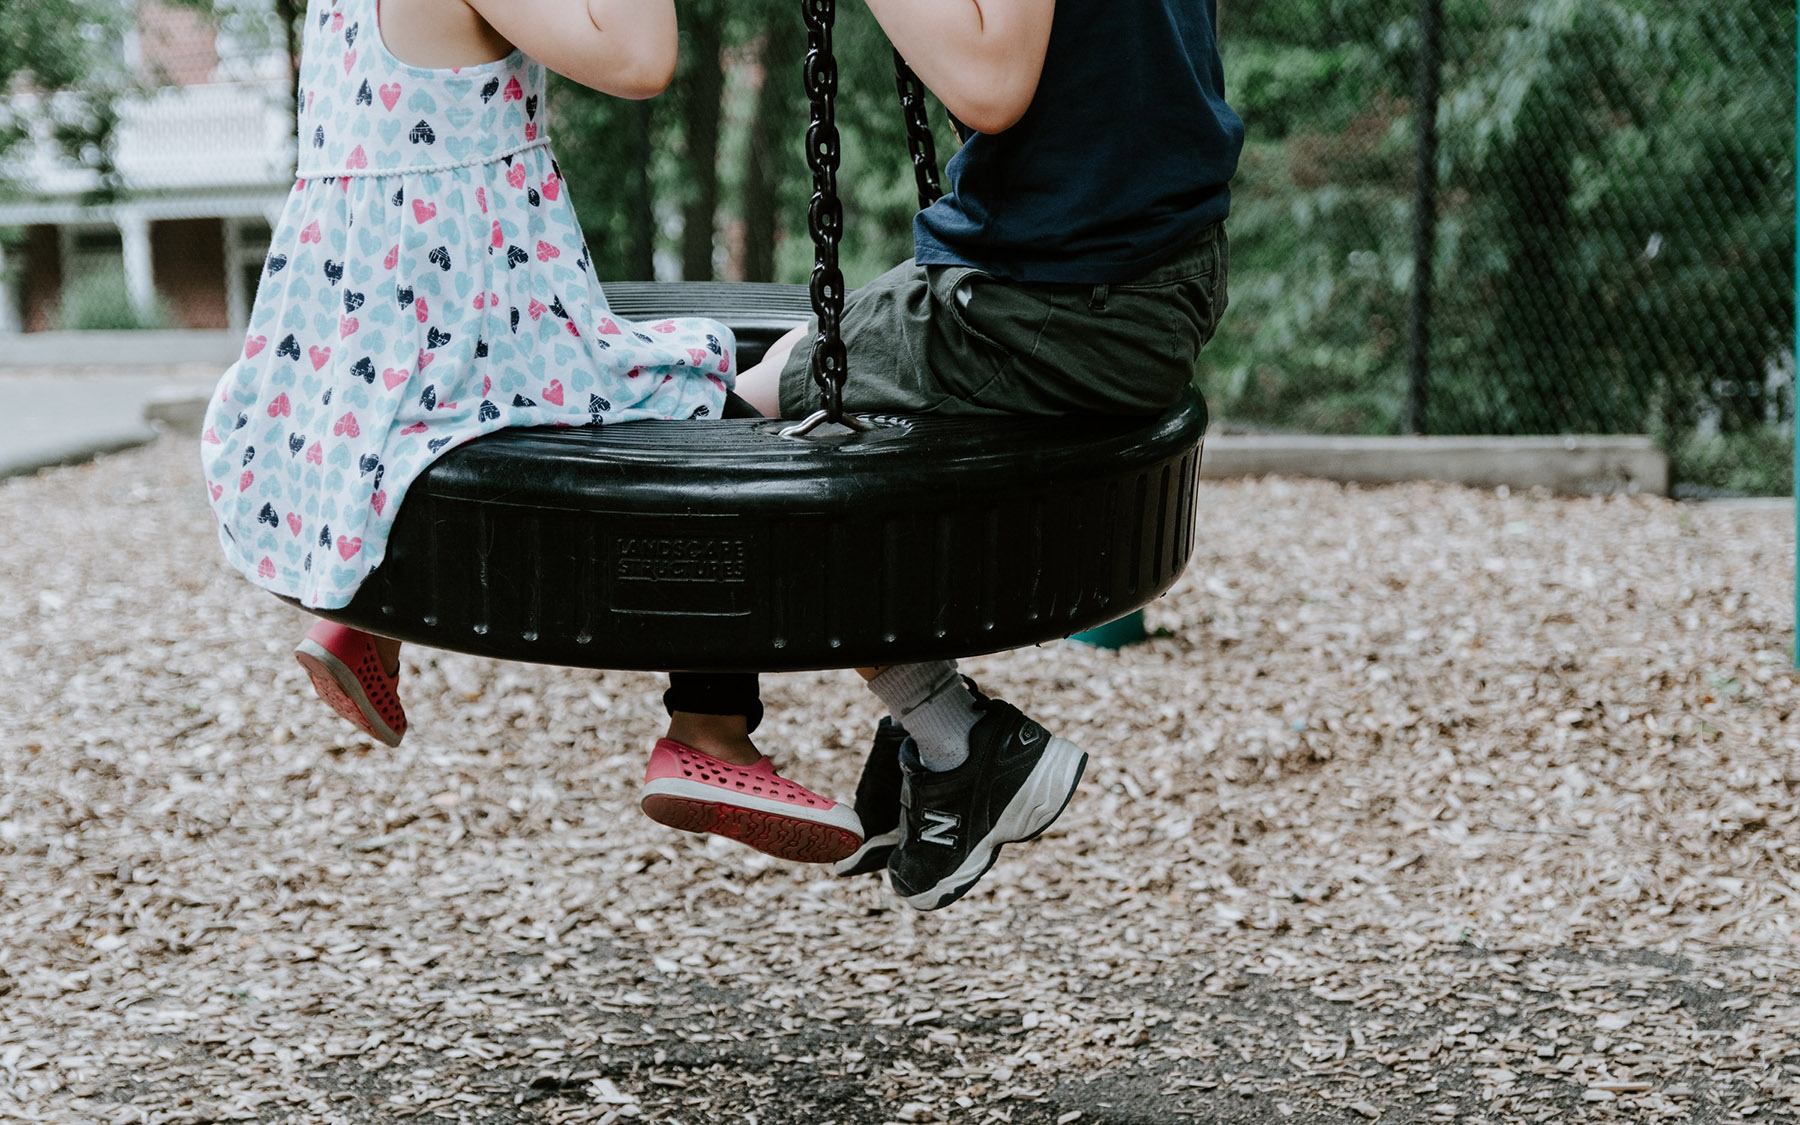 Children playing on a tire swing